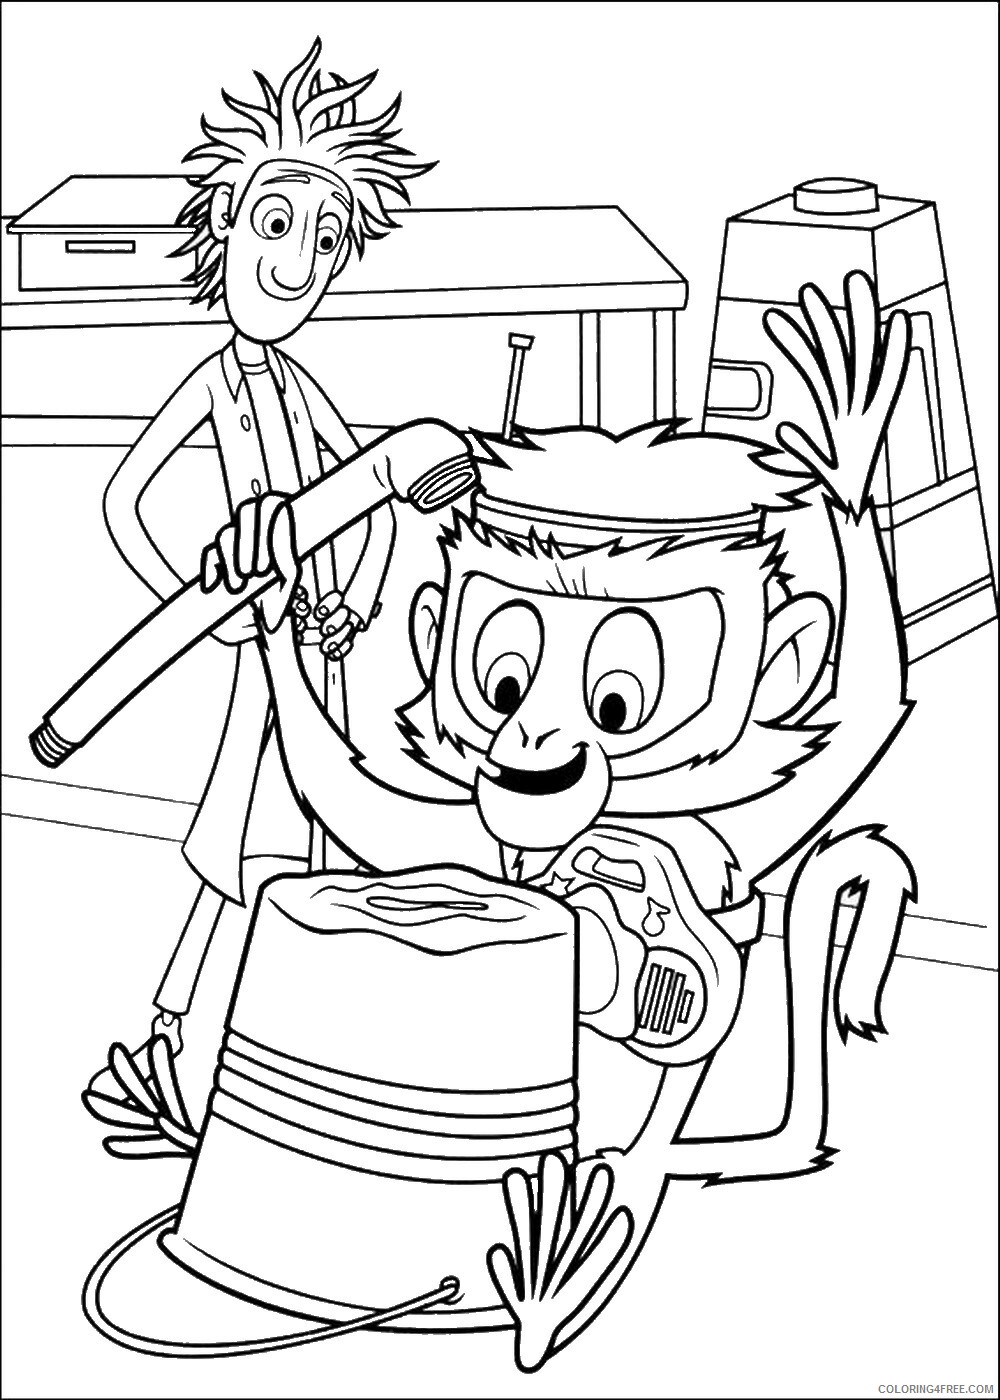 Cloudy with a Chance of Meatballs Coloring Pages TV Film Printable 2020 02222 Coloring4free